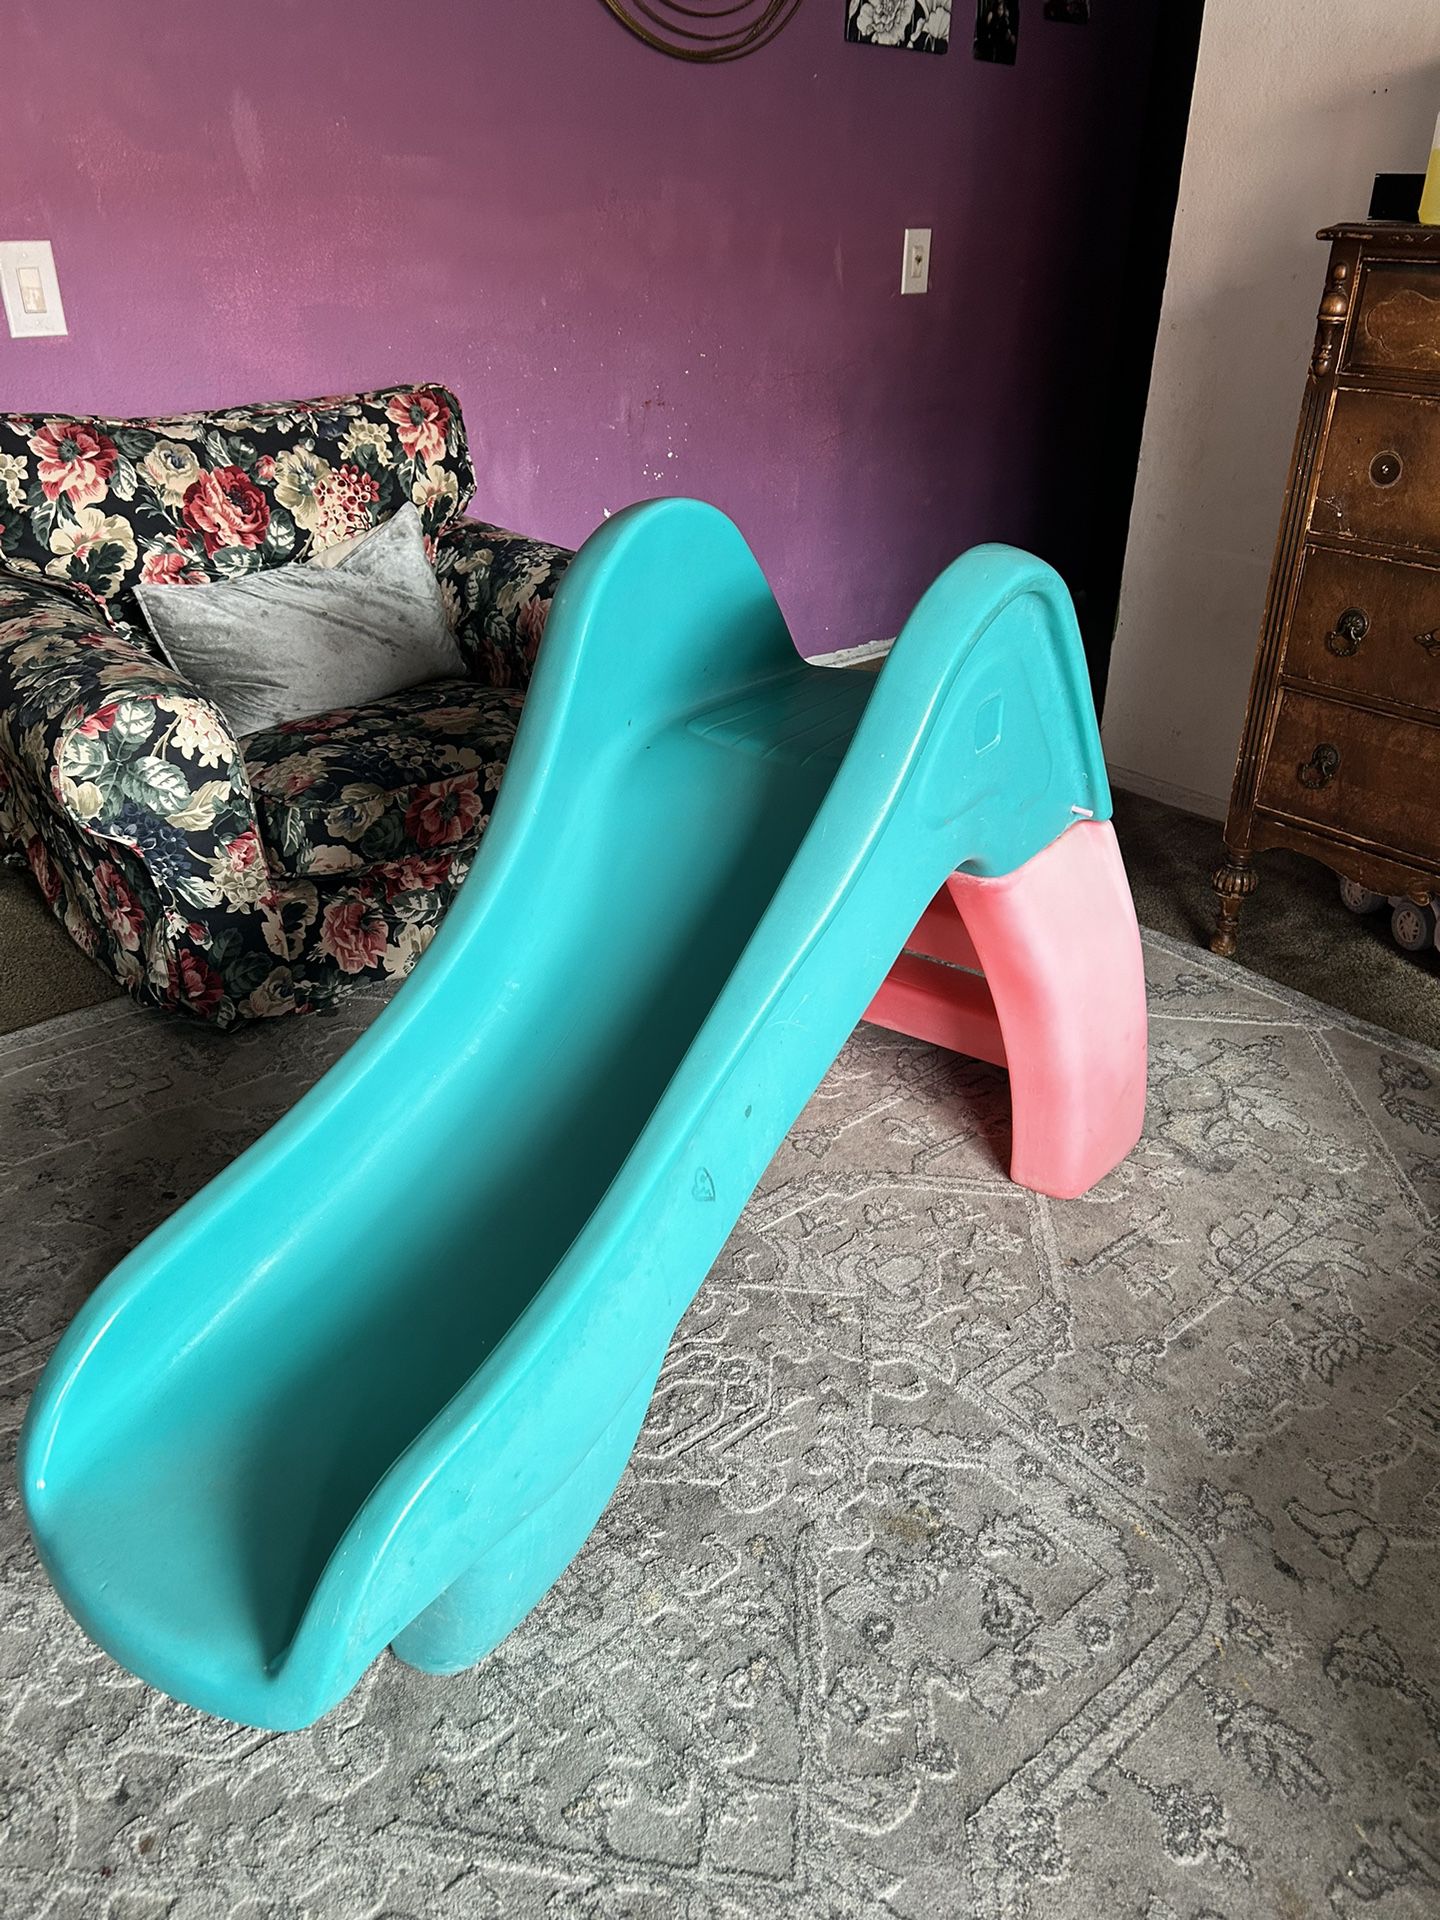 Slide And Teeter Totter For Kids! 